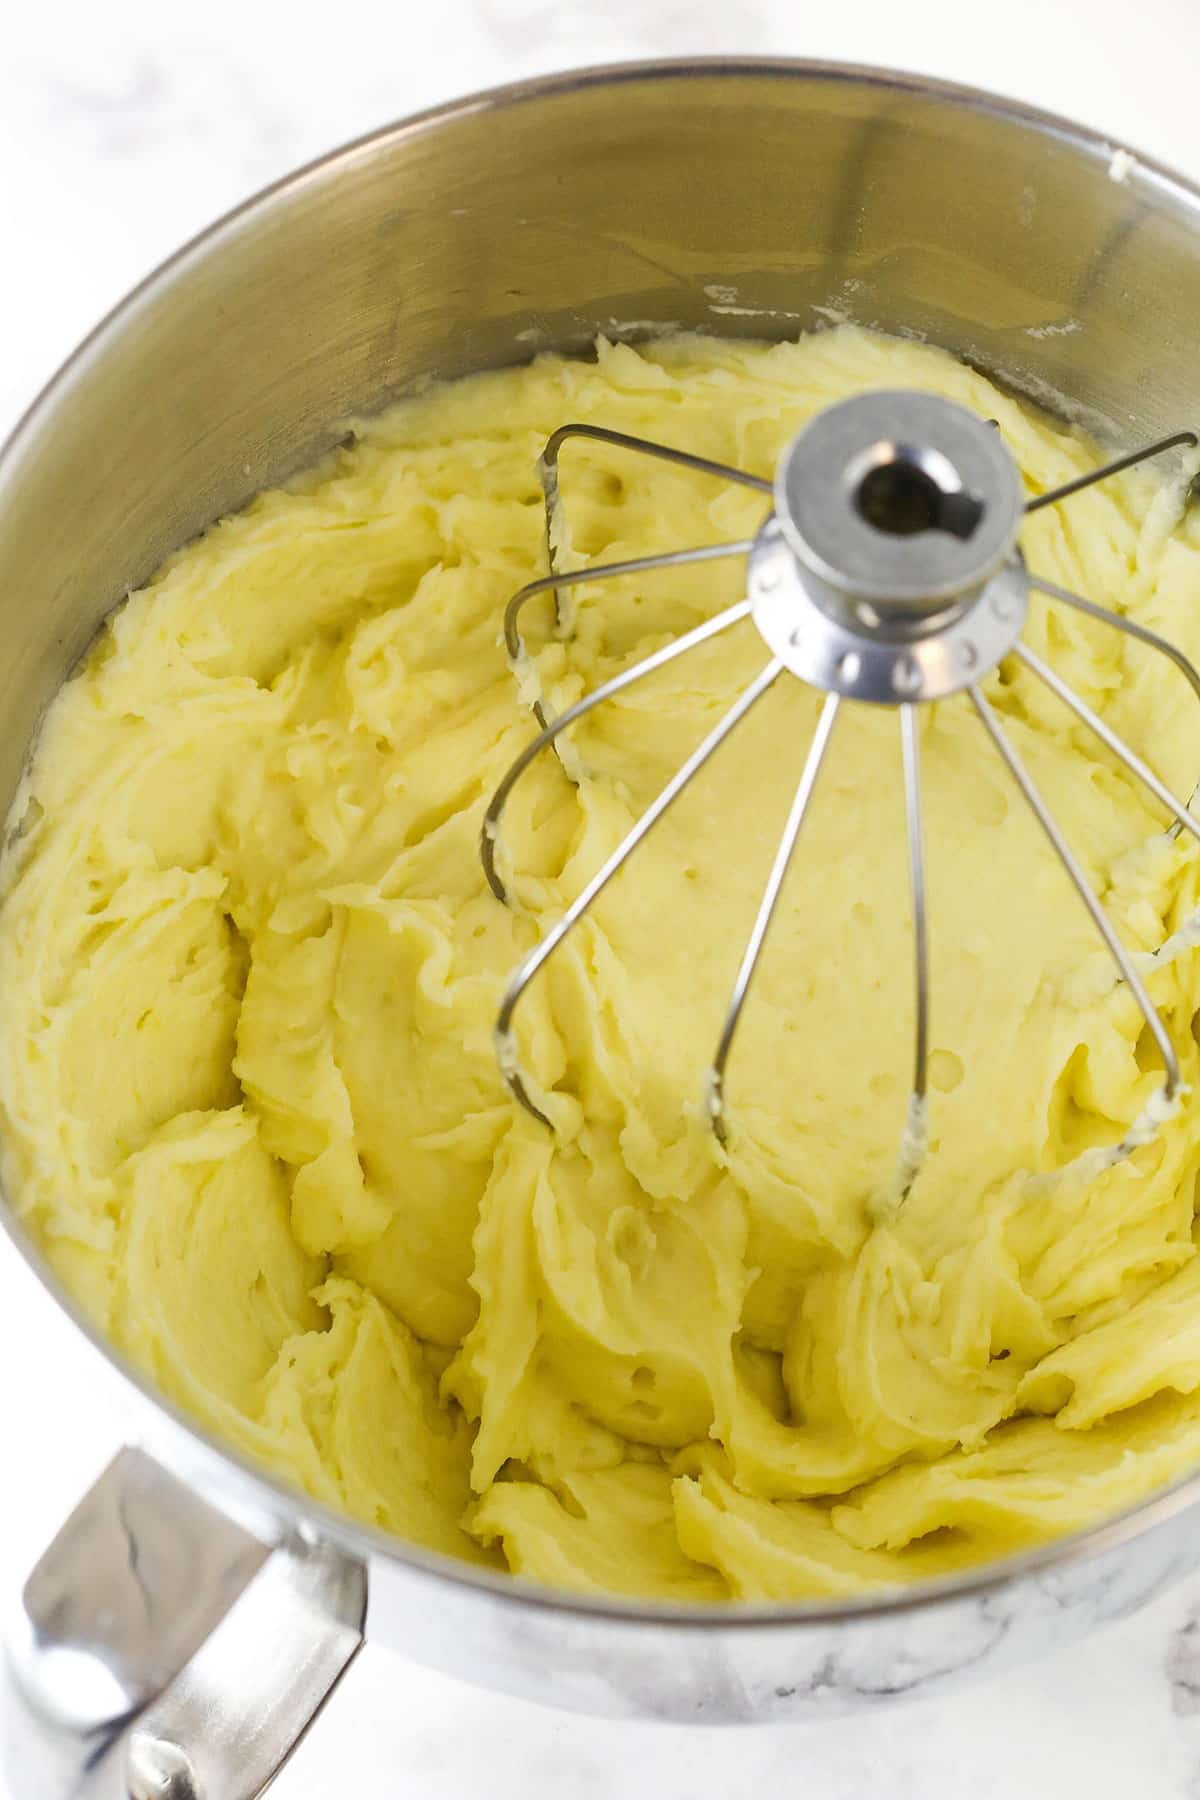 Step 6 use the whisk attachment of your mixer to mix, blend and smooth potatoes